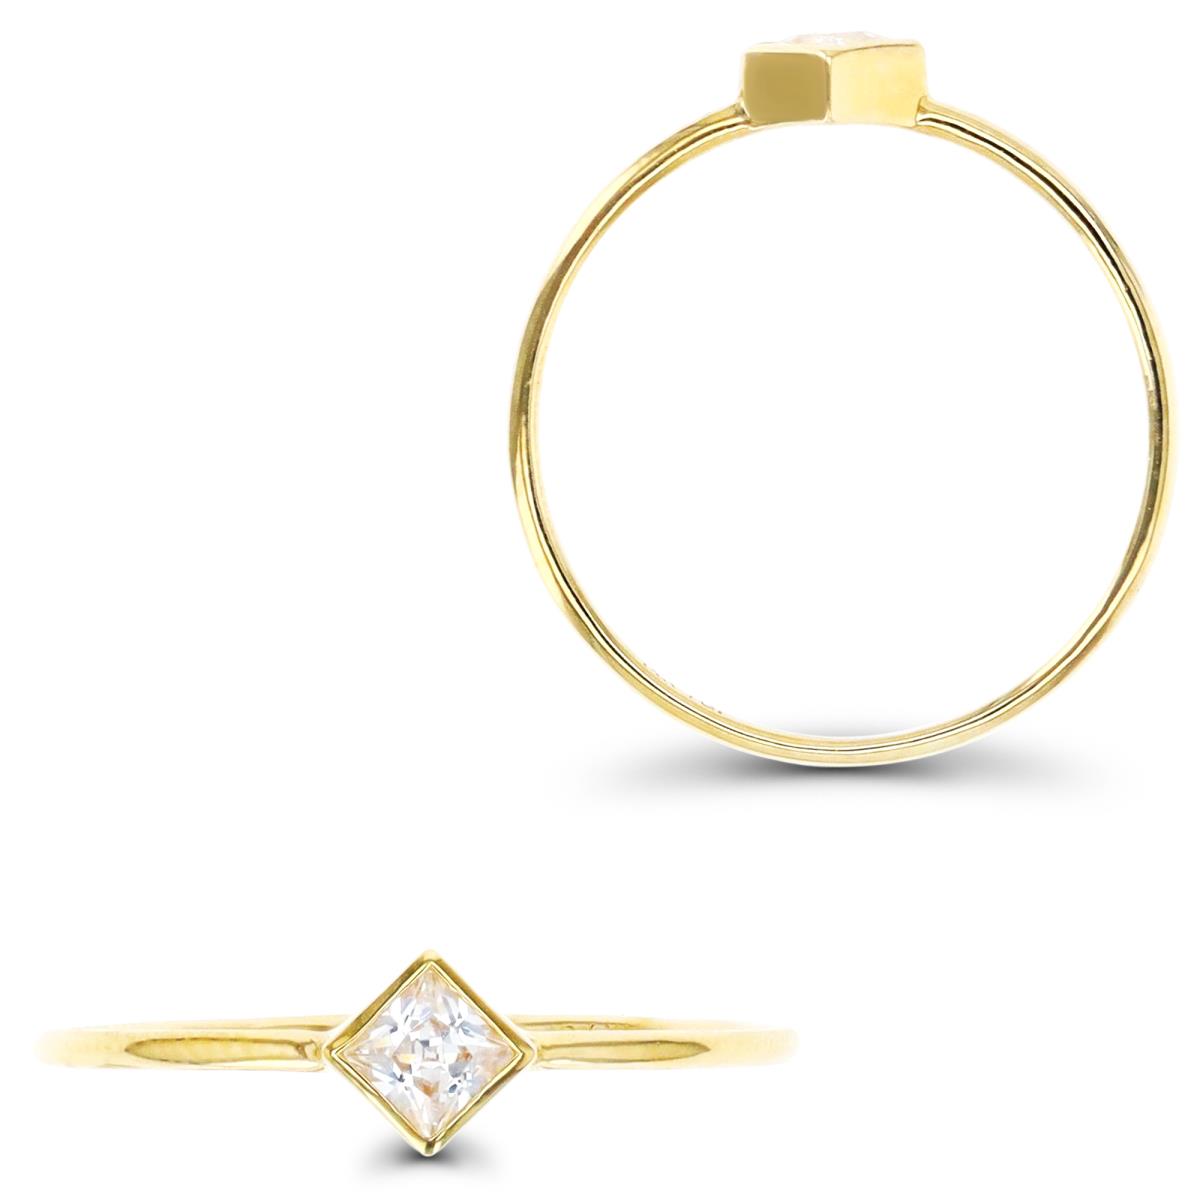 10K Yellow Gold 5.2MM Solitaire Princess Cut White CZ  Ring